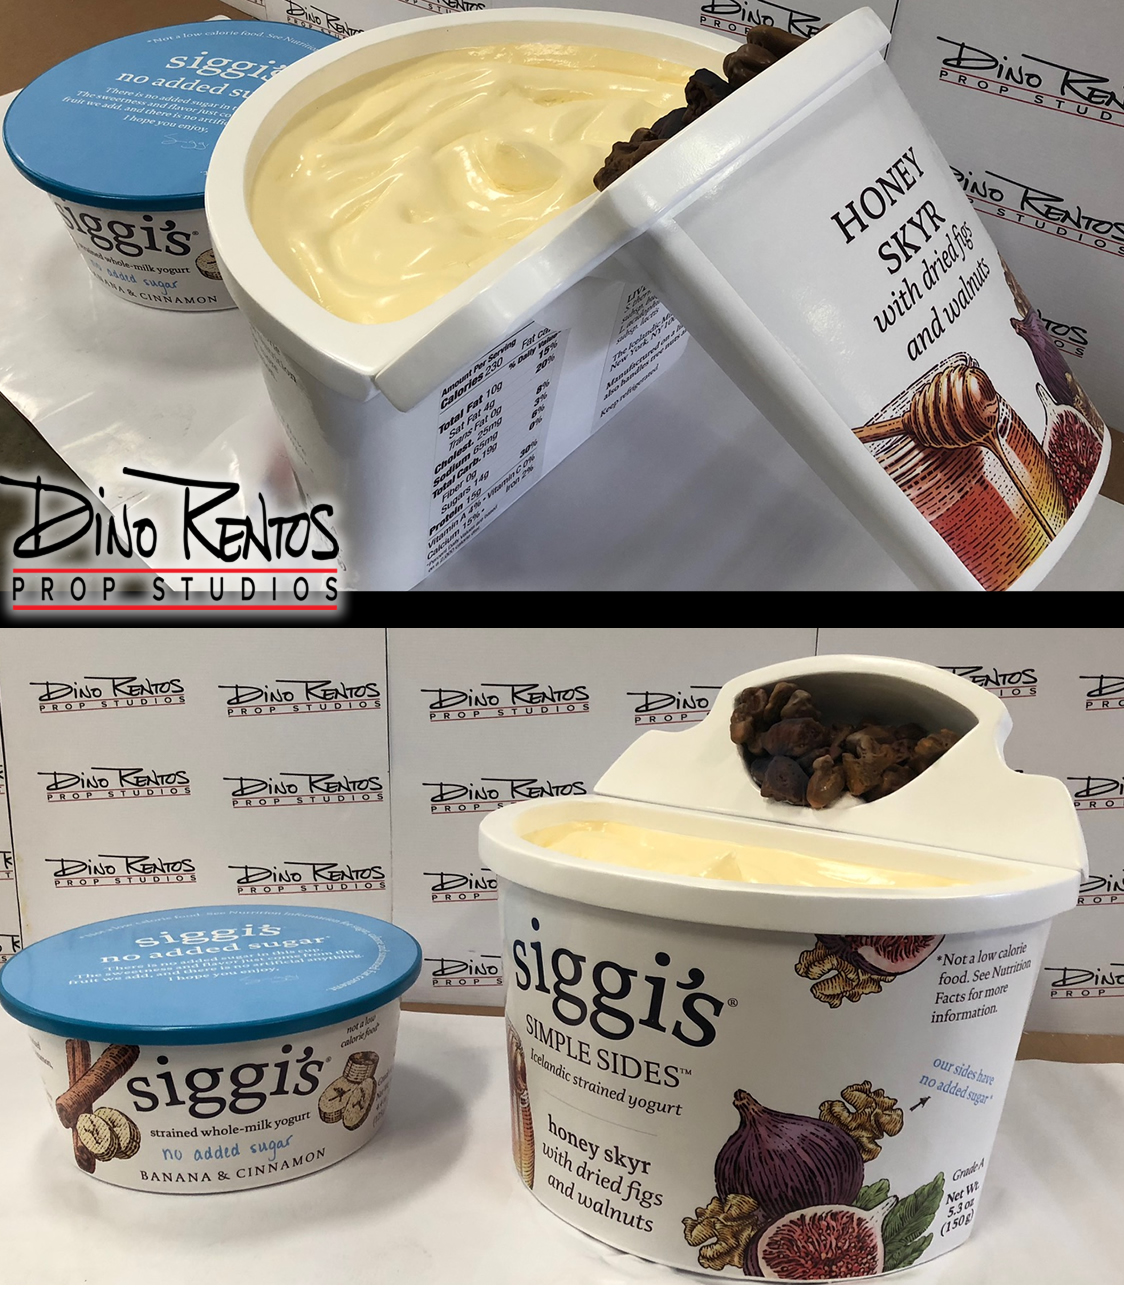 Large Foam Yogurt Cup Prop Replica for tradeshows and corporate events